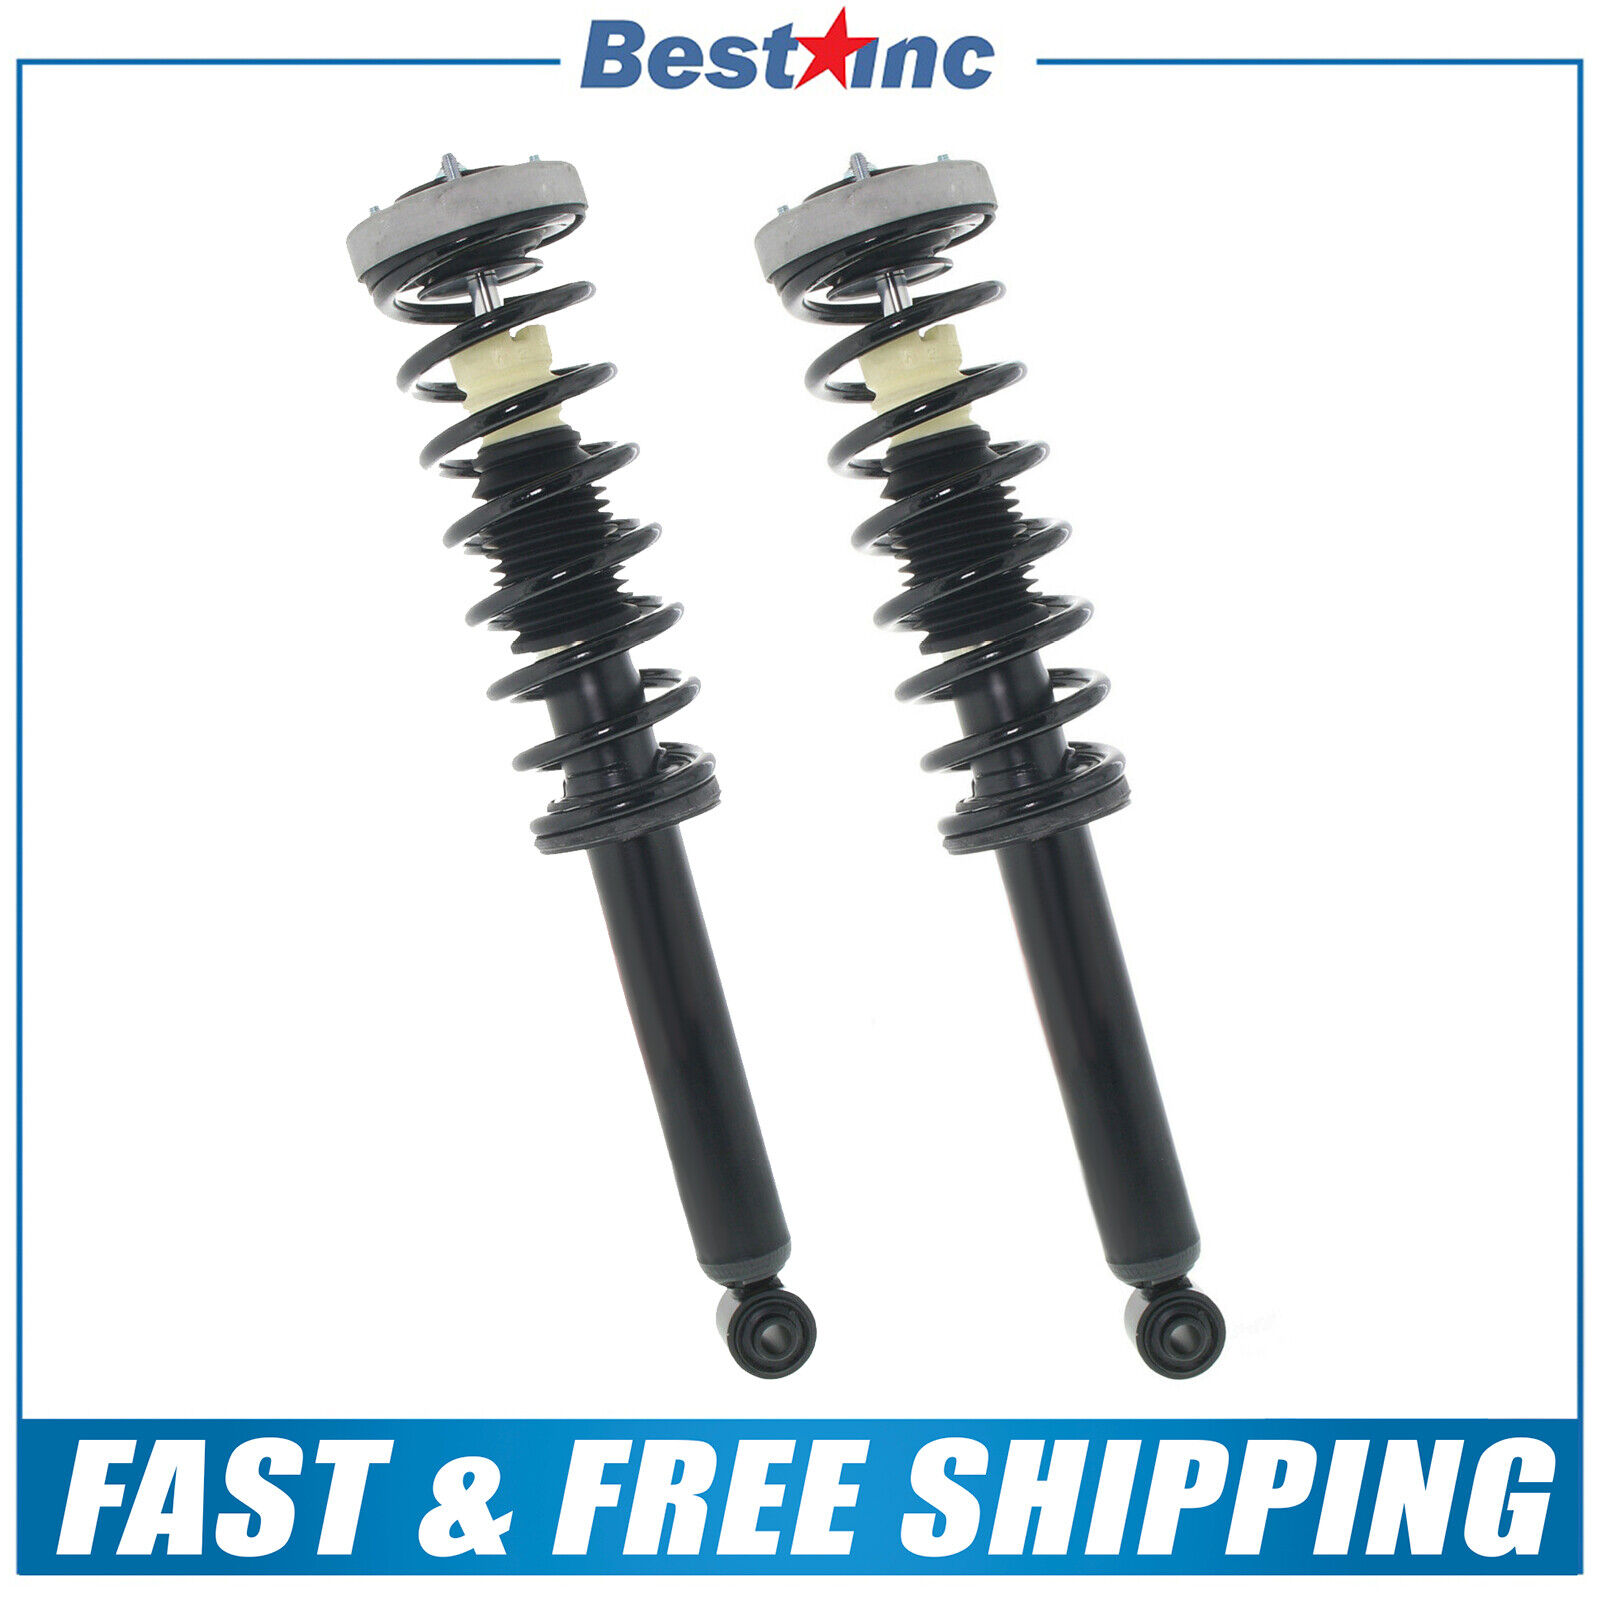 Rear Pair (2) Complete Struts Assembly for 2004 2005 2006 2007-2010 BMW 5 Series